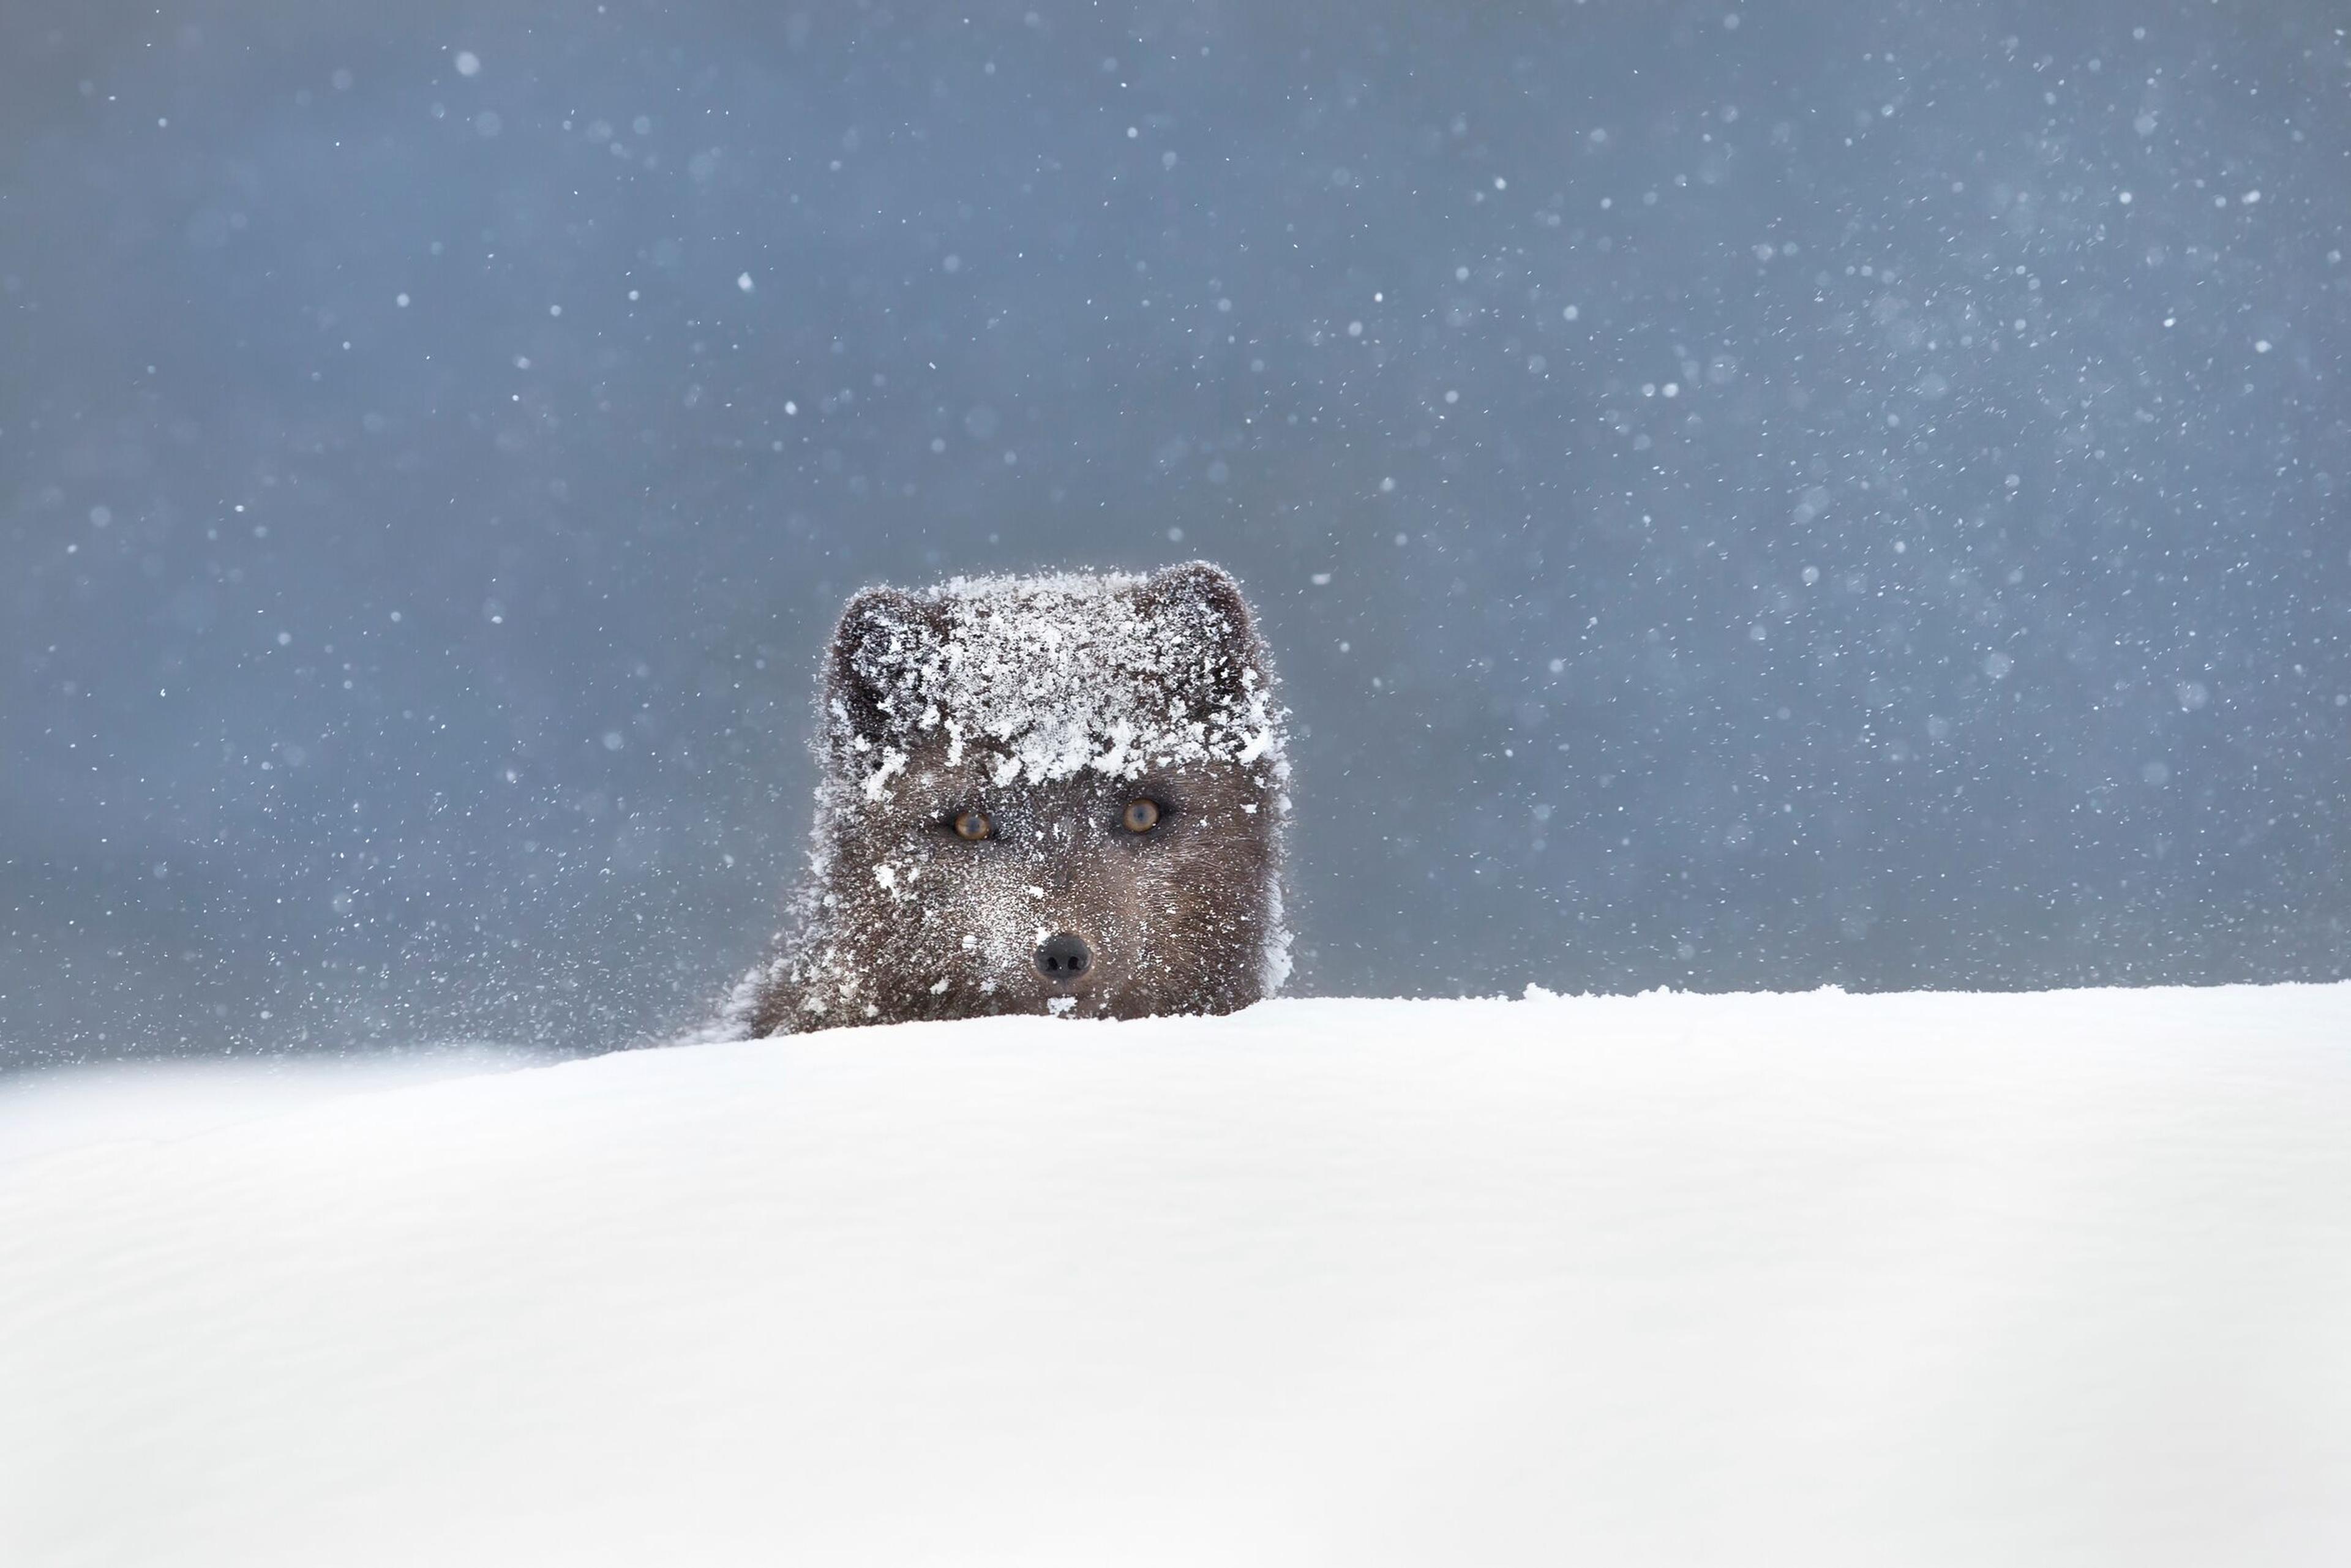 A close-up of a curious arctic fox peeking out over a snowdrift, with snowflakes lightly dusting its head and face